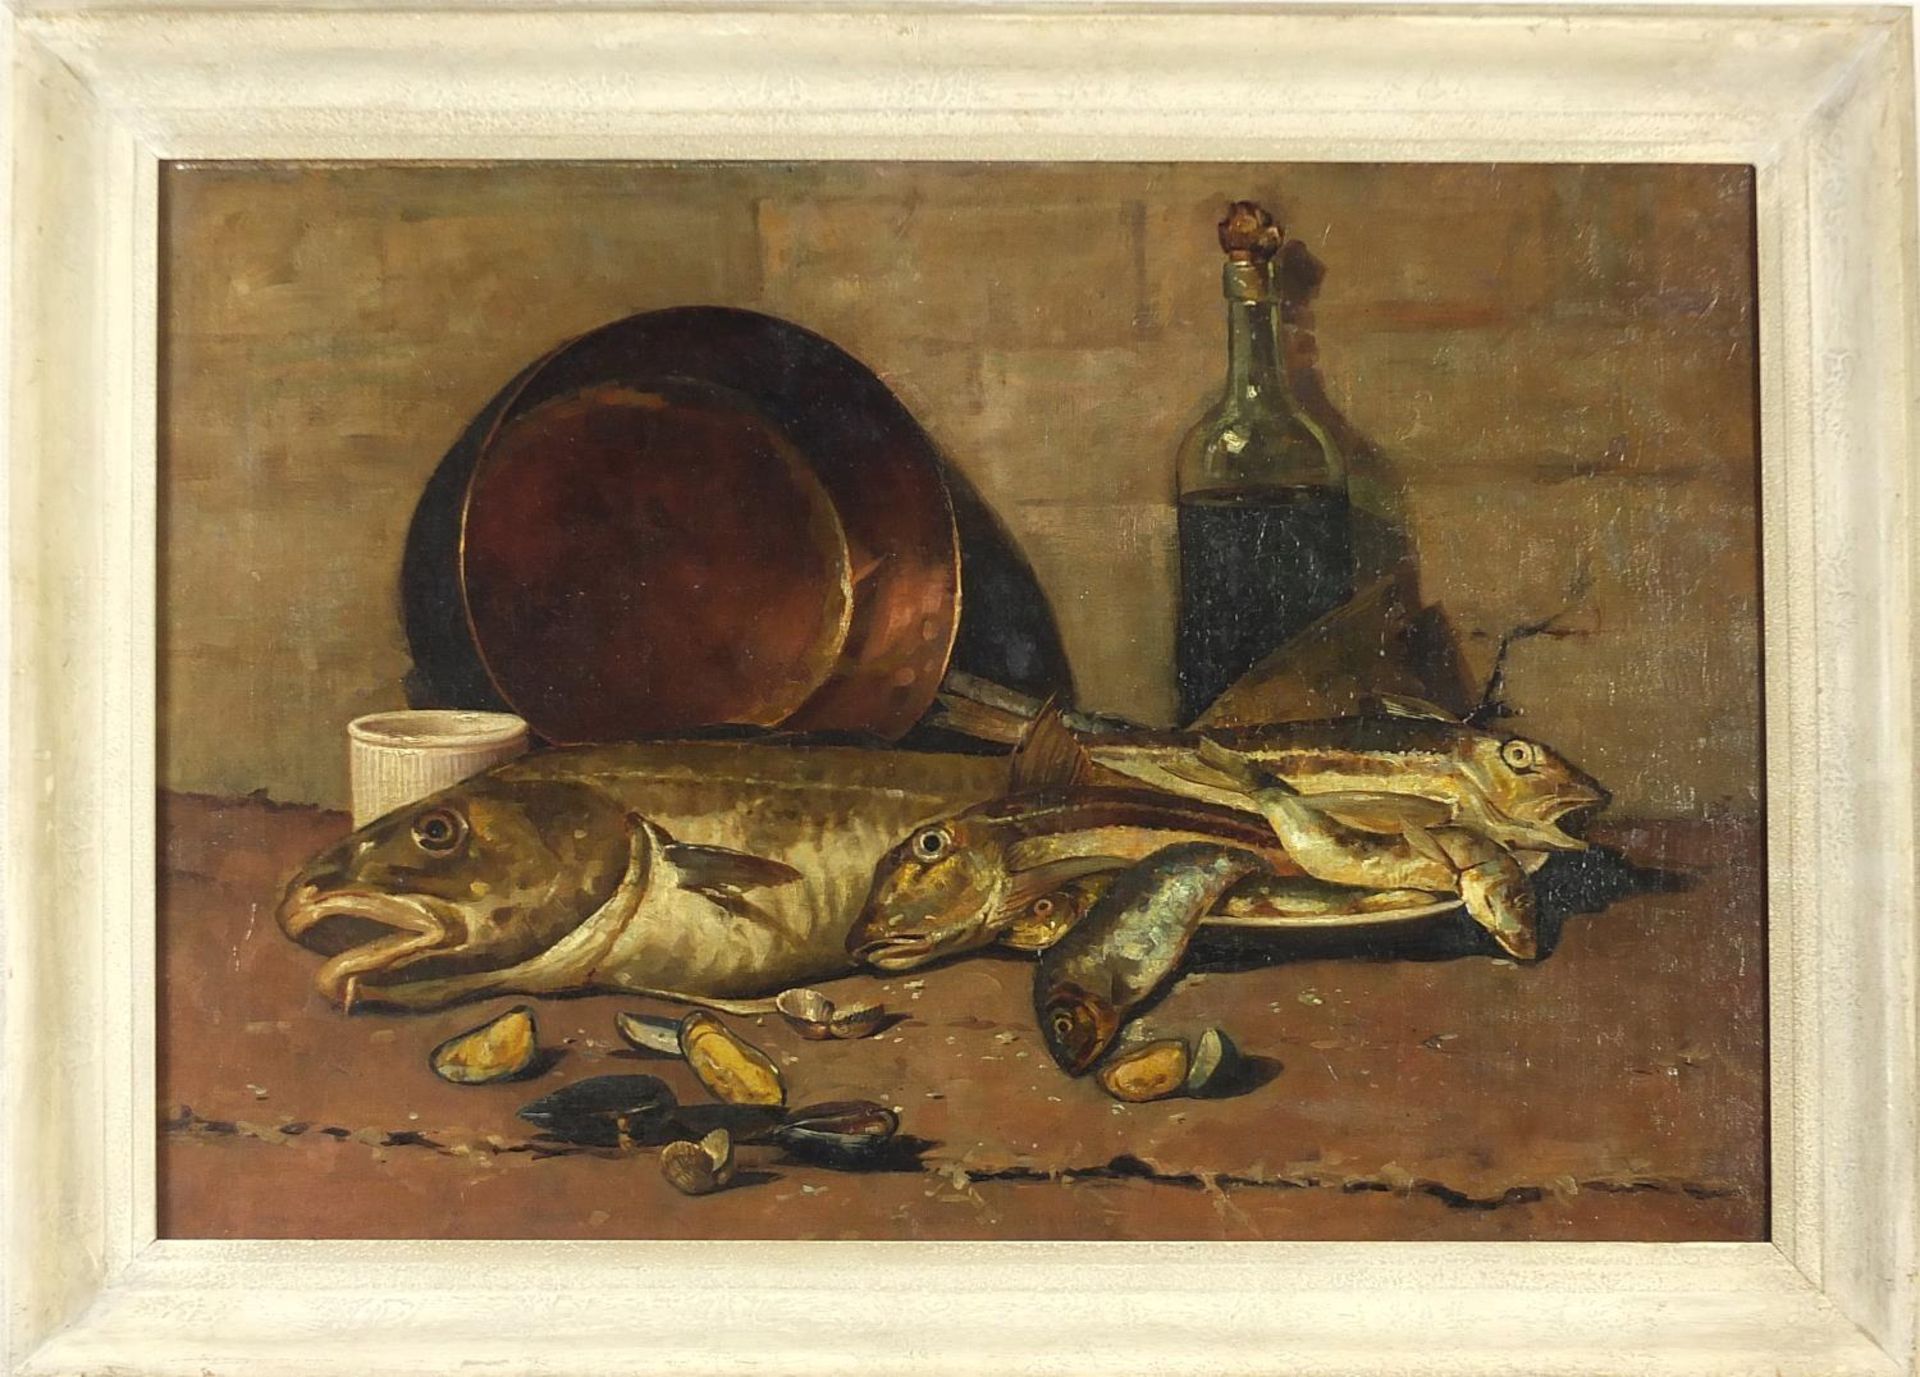 Still life fish, copper pan, bottle, and shells, antique oil on canvas, framed, 73.5cm x 49.5cm - Image 2 of 3